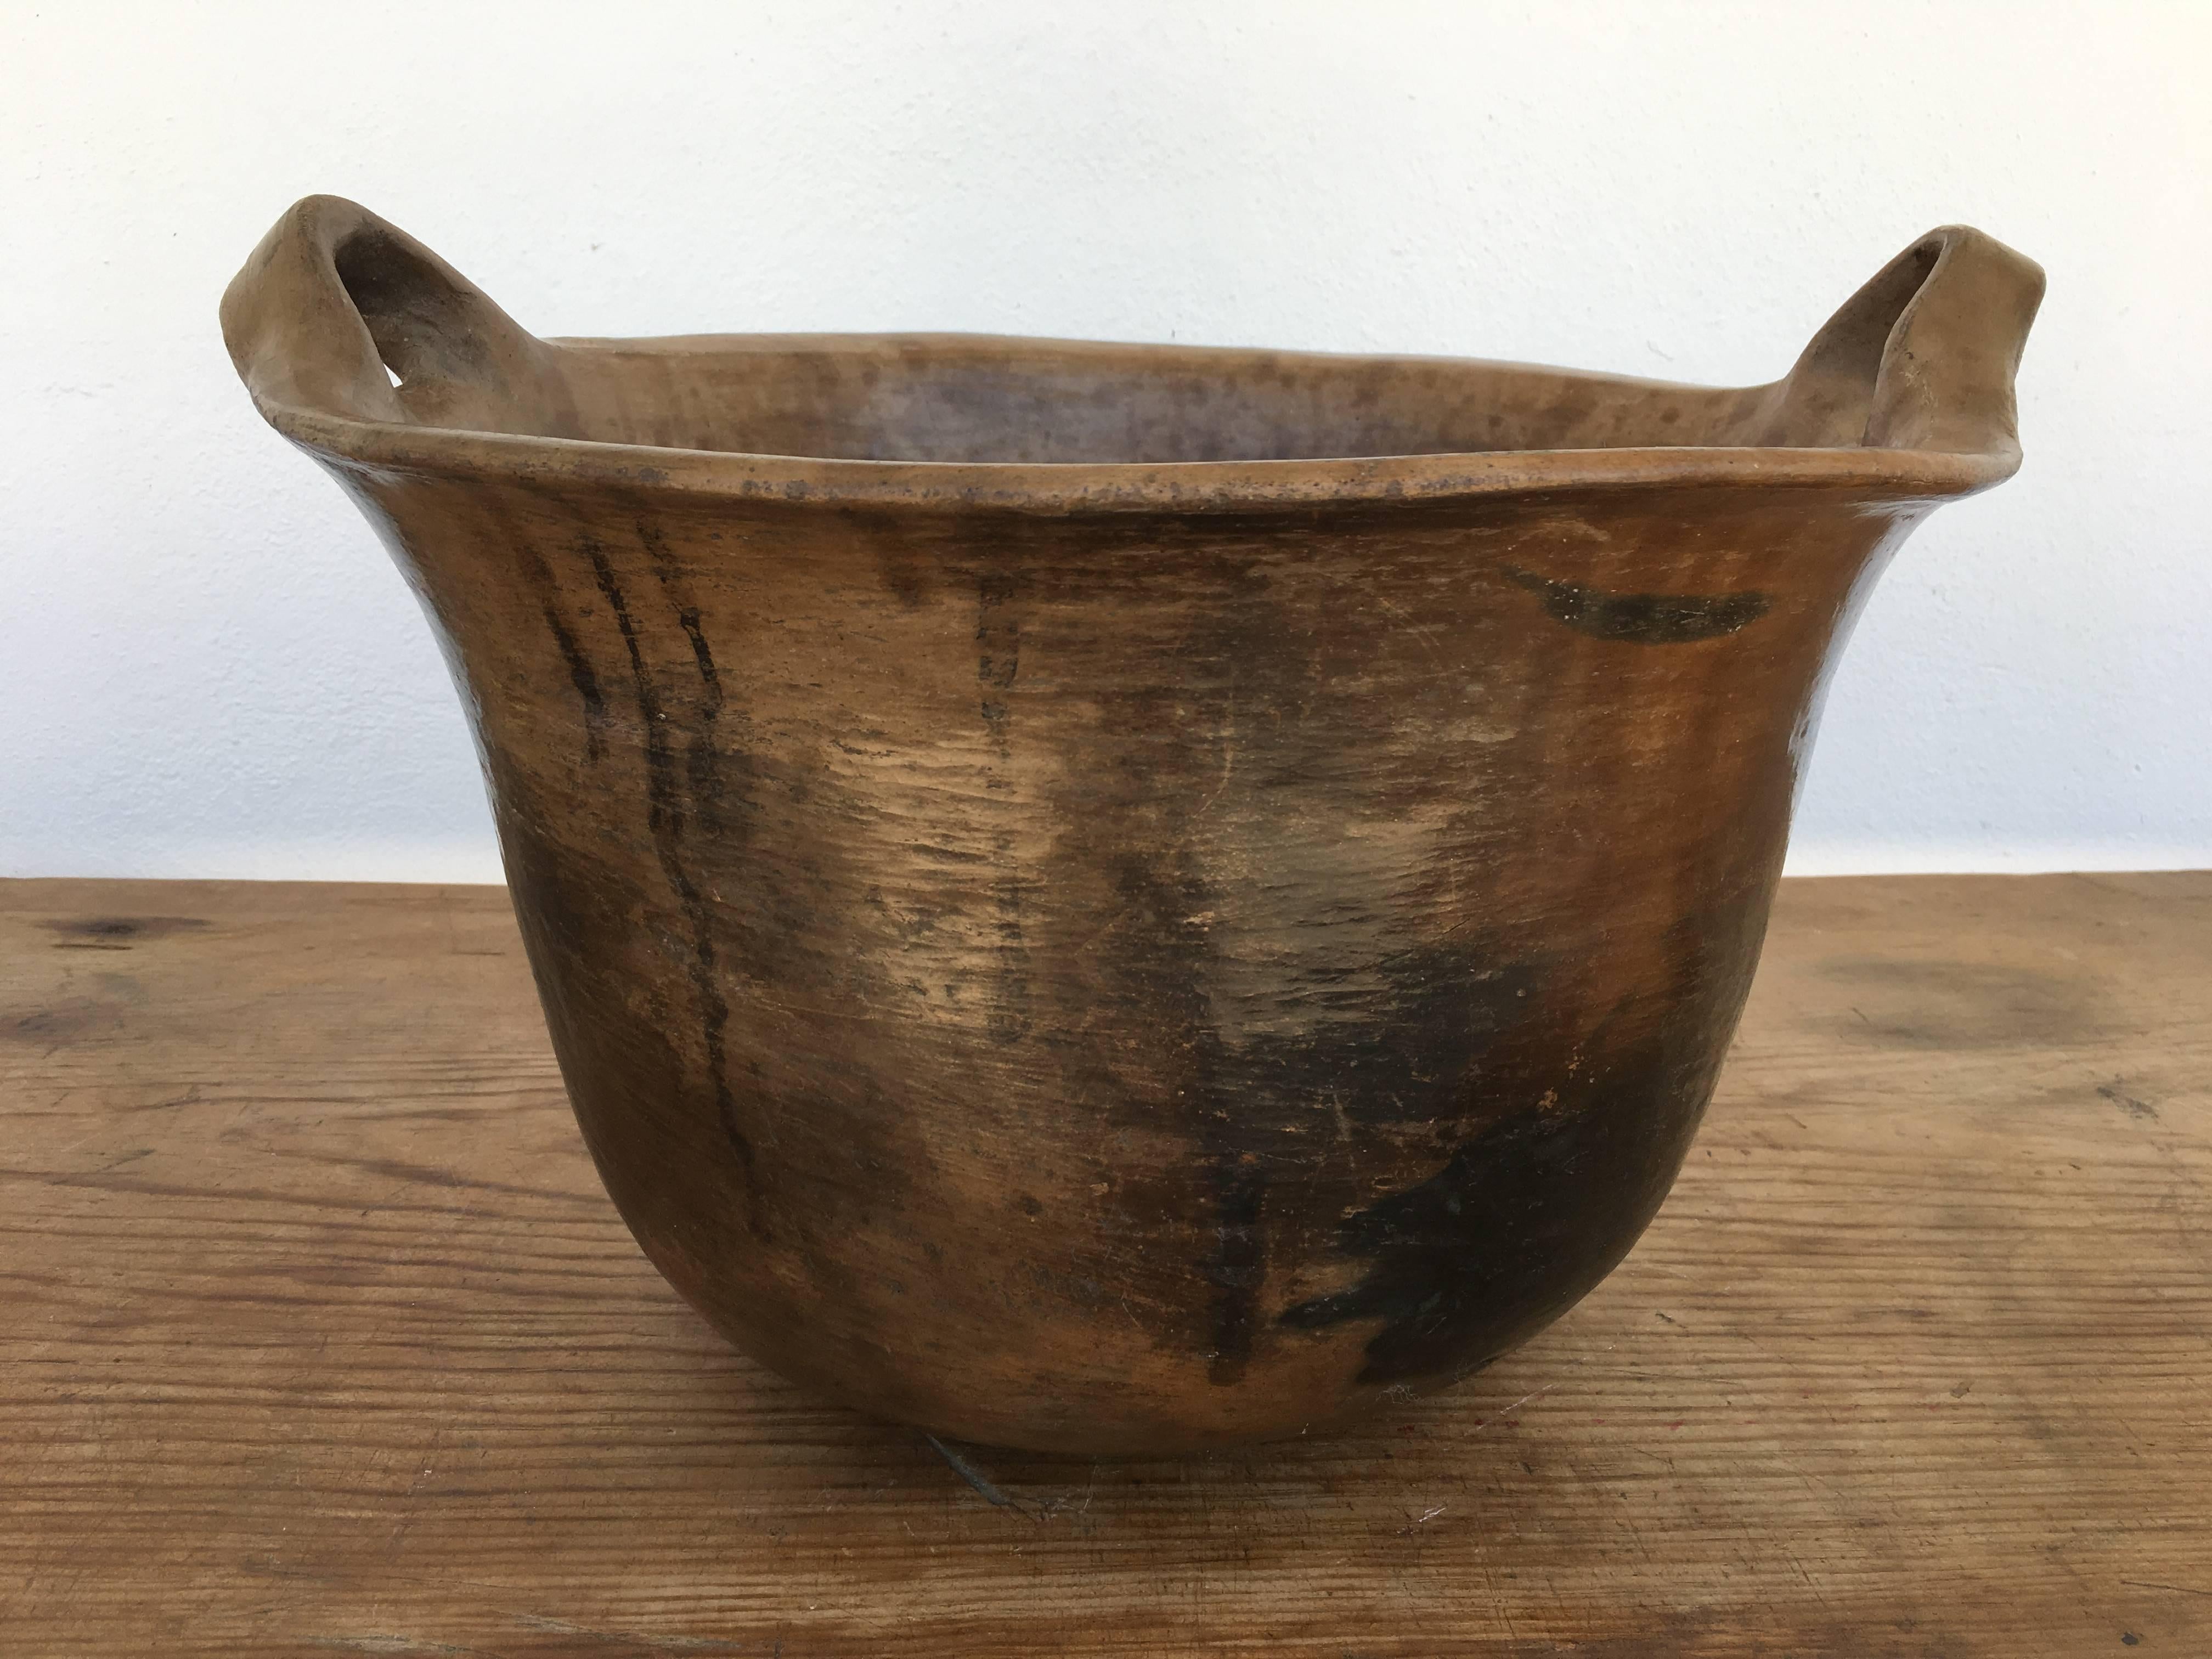 Rustic Ceramic Bowl Used for Candle-Making from Mexico